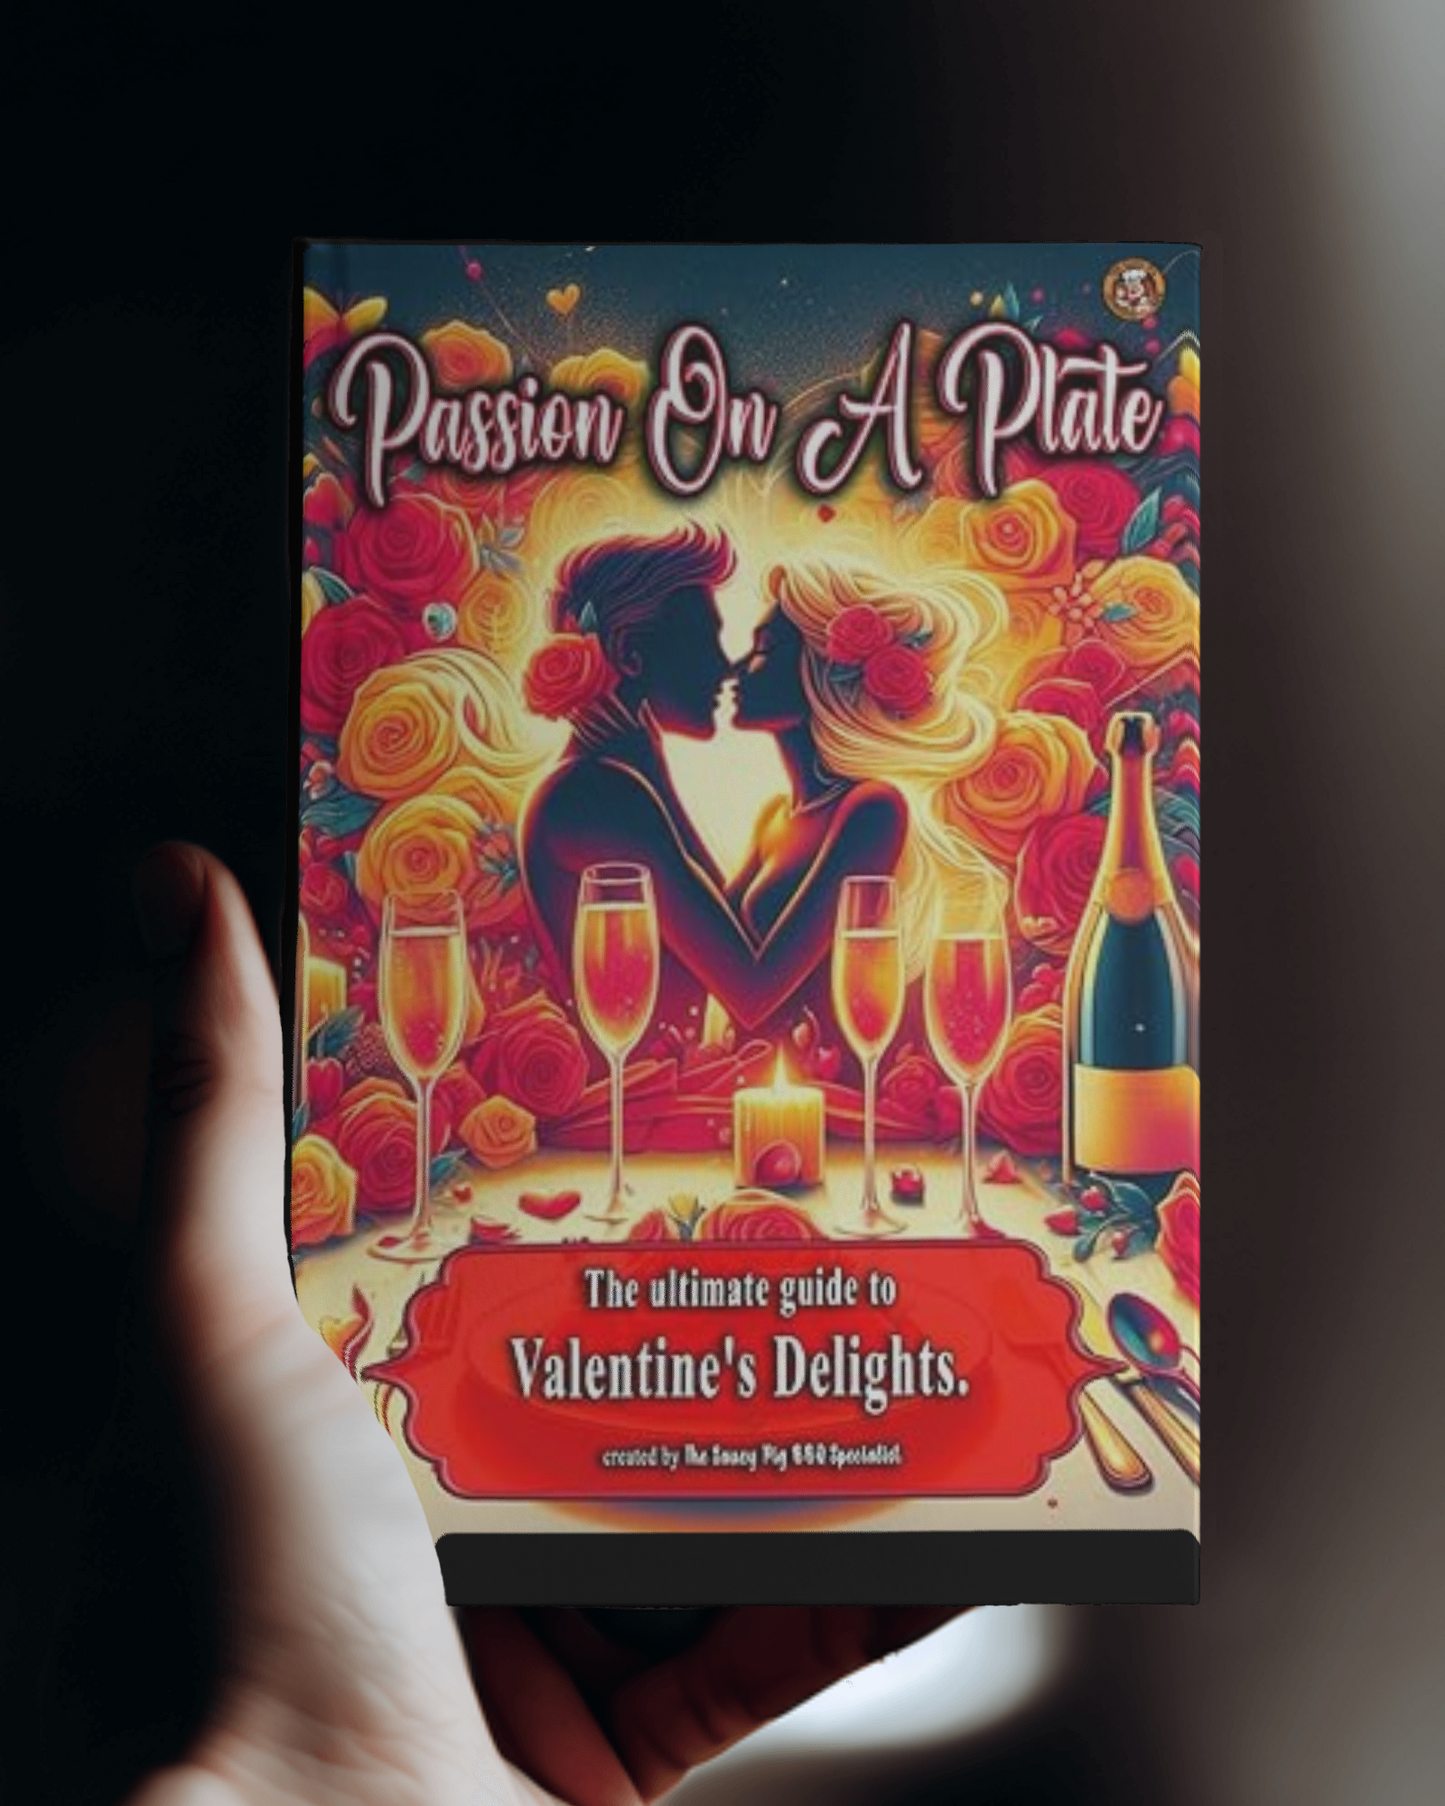 Passion On A Plate - The ultimate guide to Valentines Delights